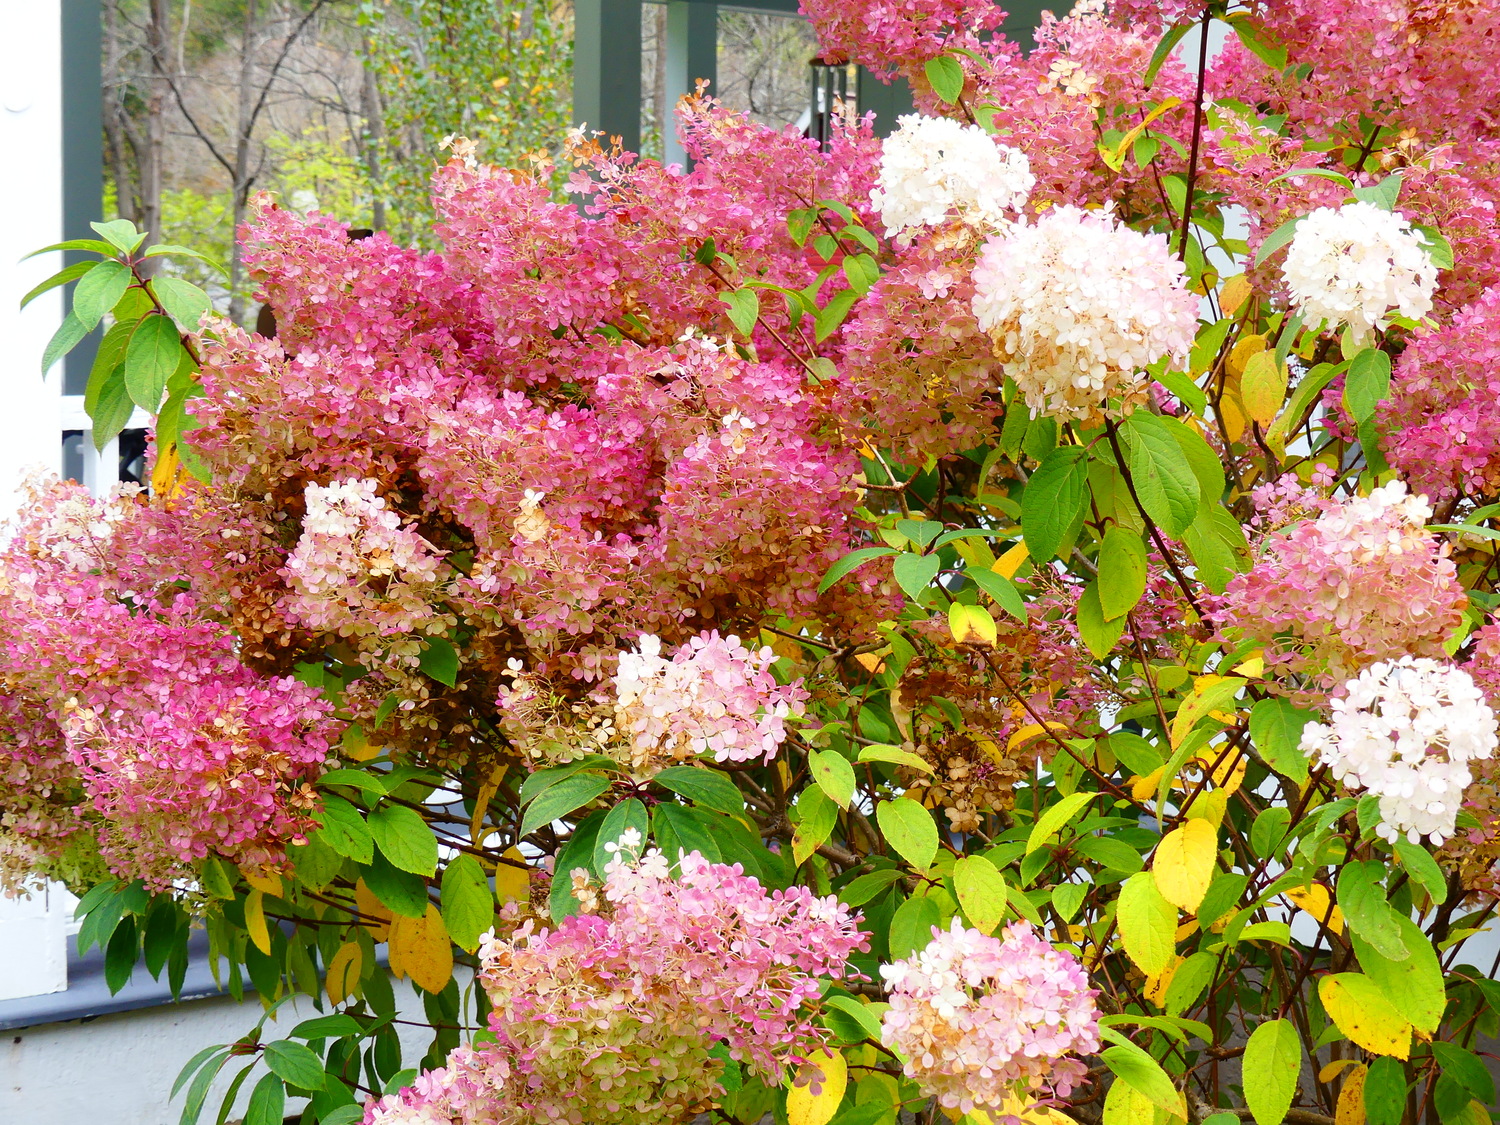 Hydrangea flowers on the same plant in various shades of white to pink make nice cuts with strong, woody stems.  ANDREW MESSINGER